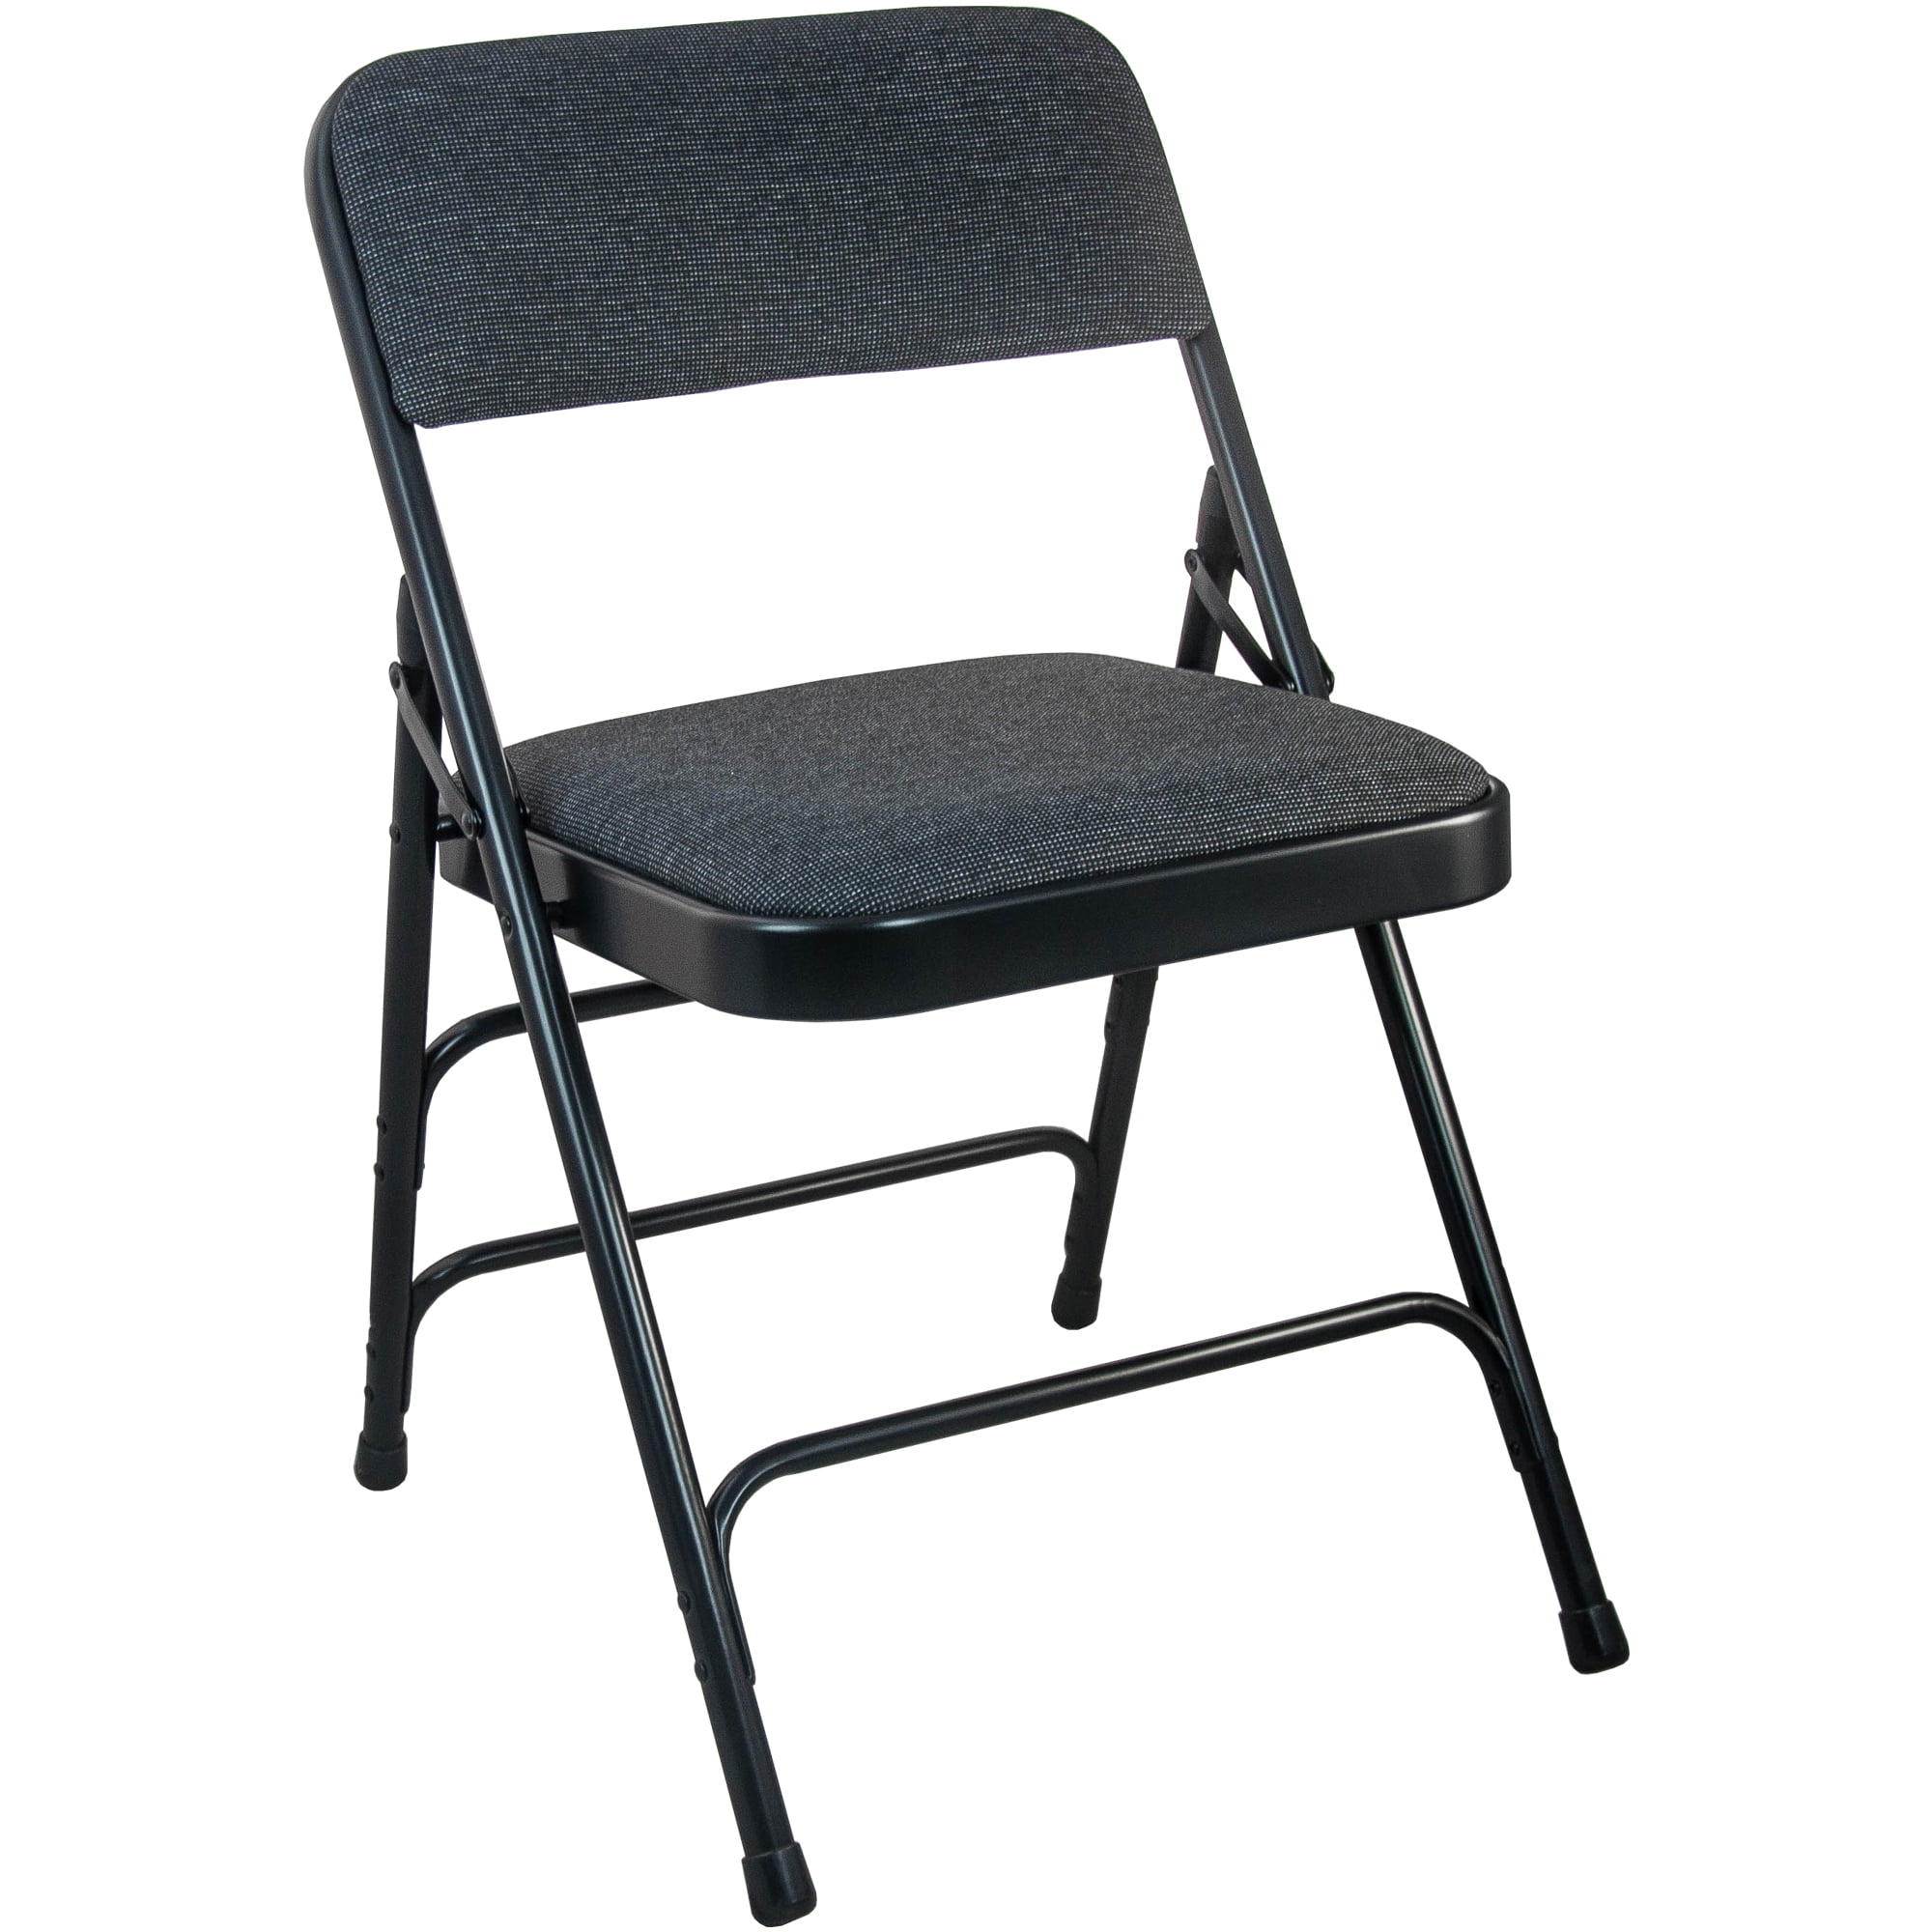 2-Pack Black Padded Metal Folding Chair with Fabric Seat - Walmart.com